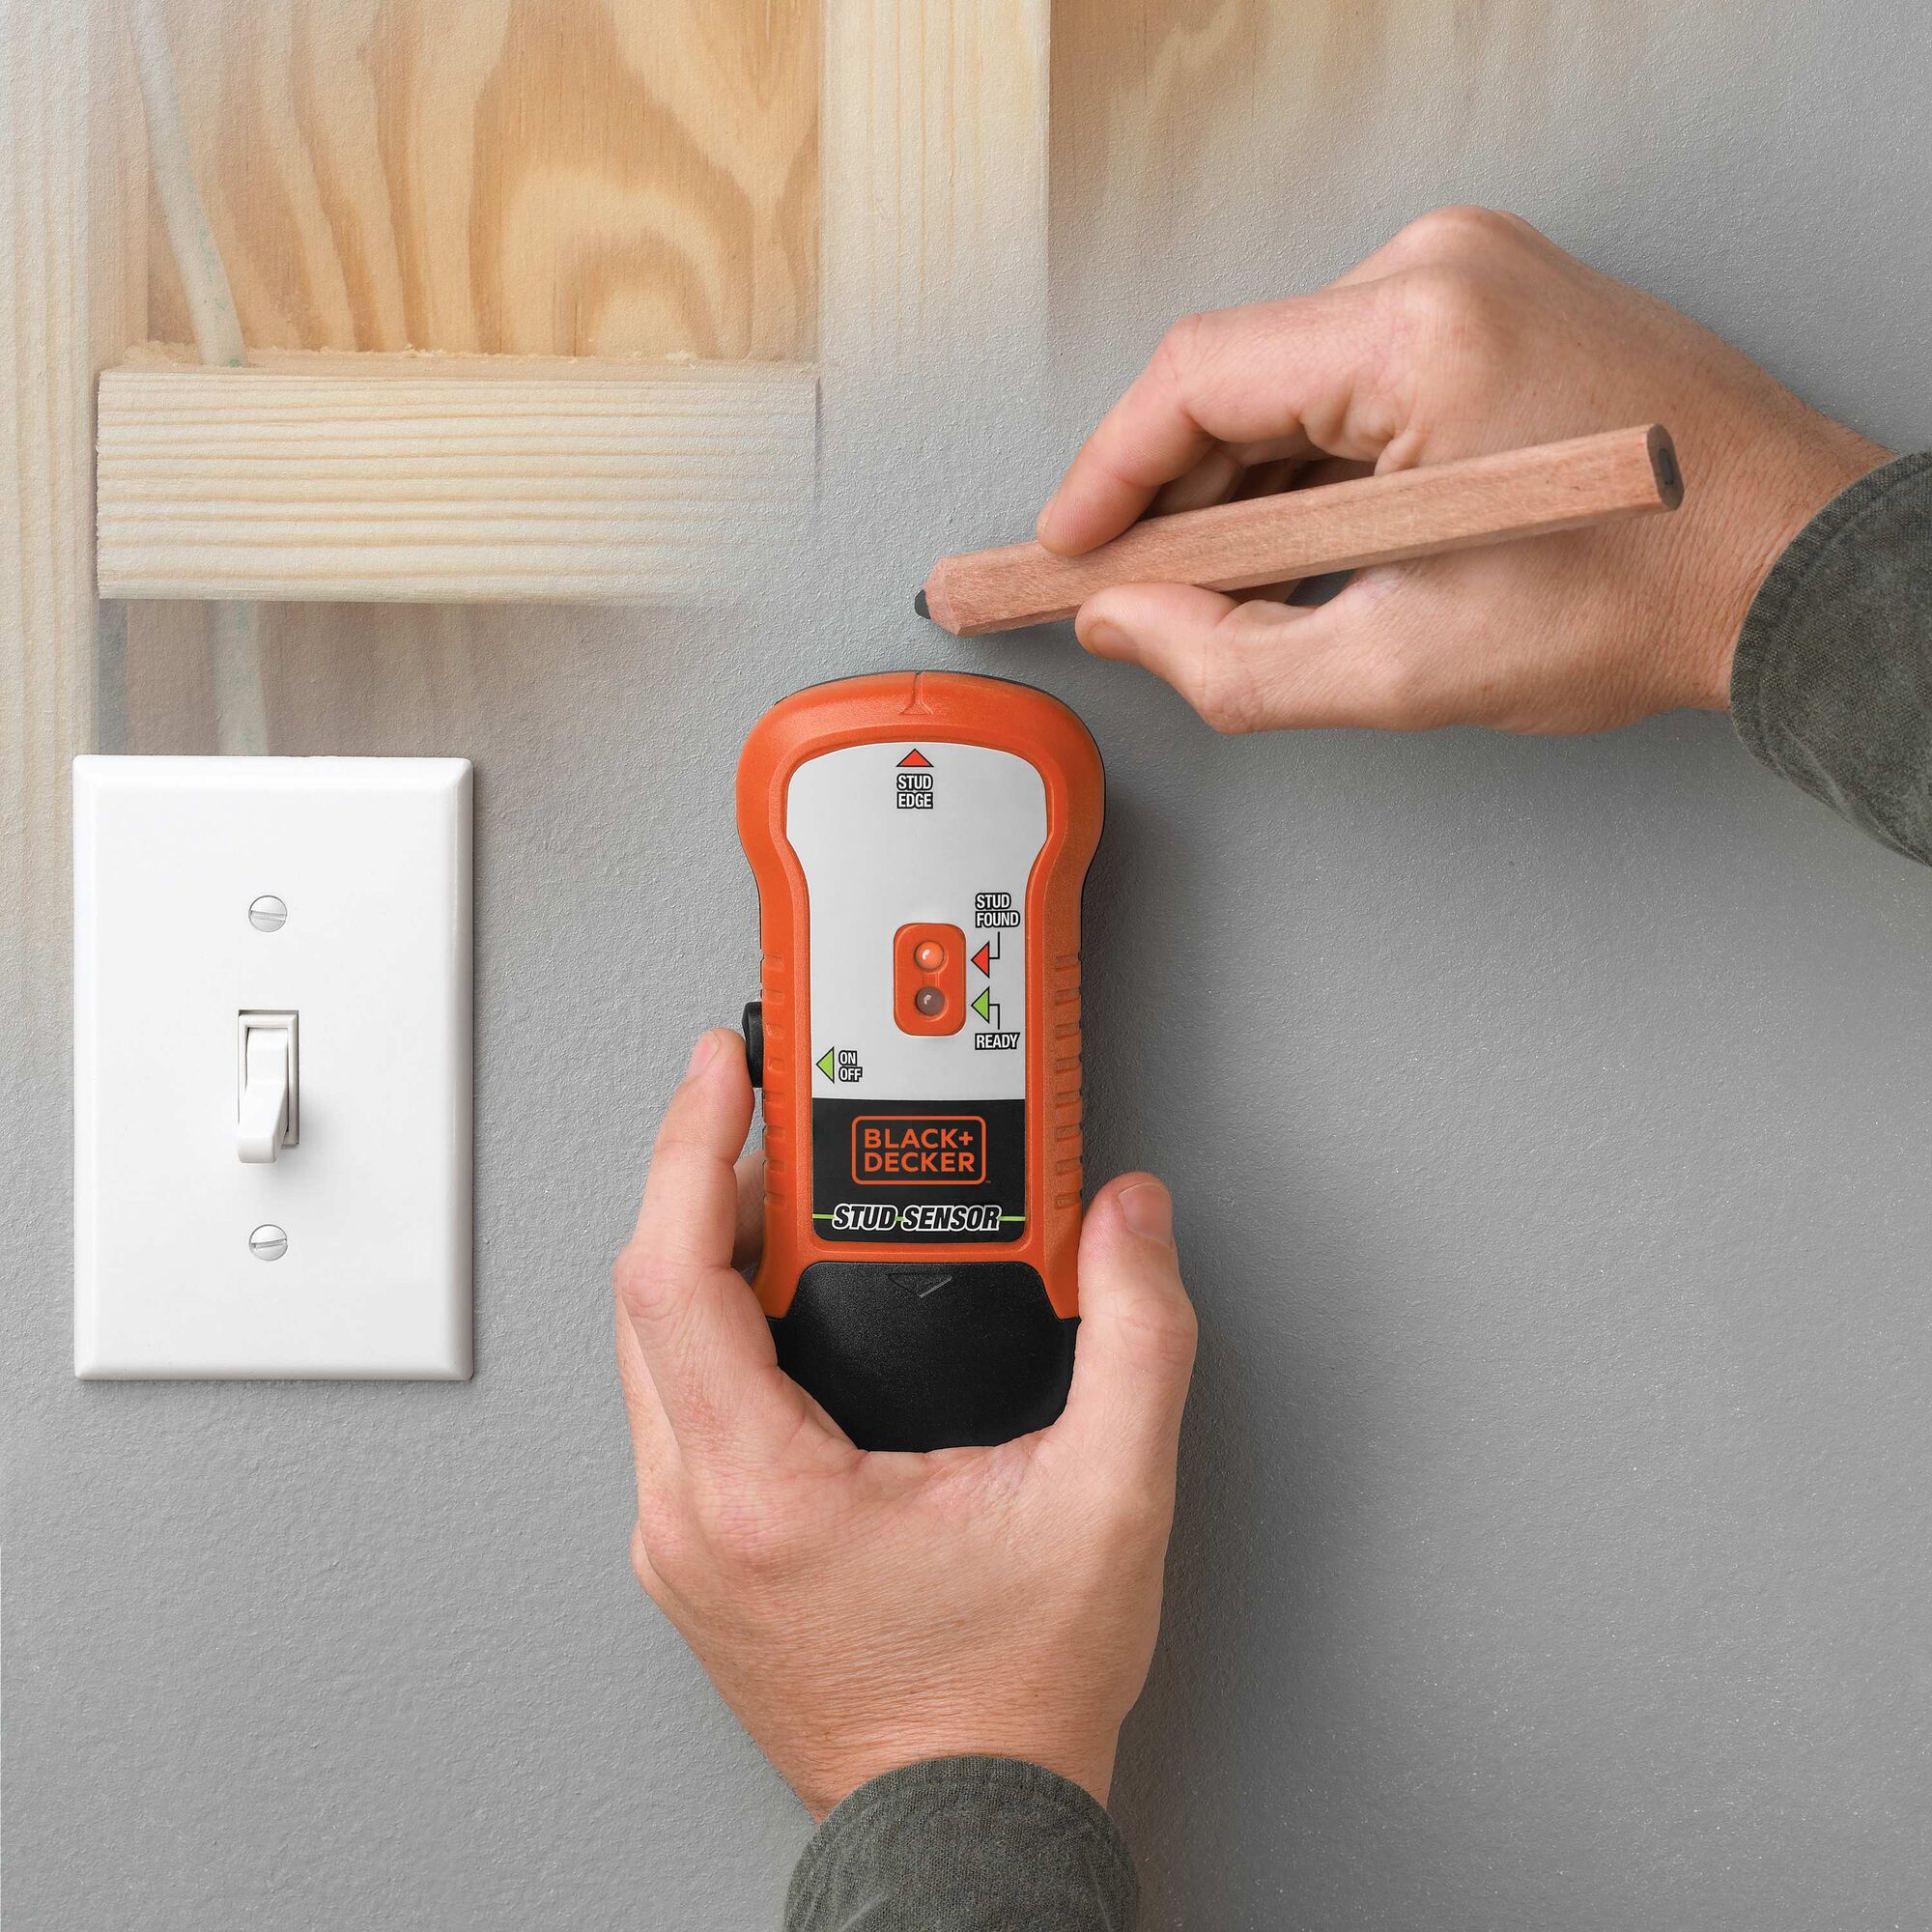 Stud Sensor being used on a dry wall.